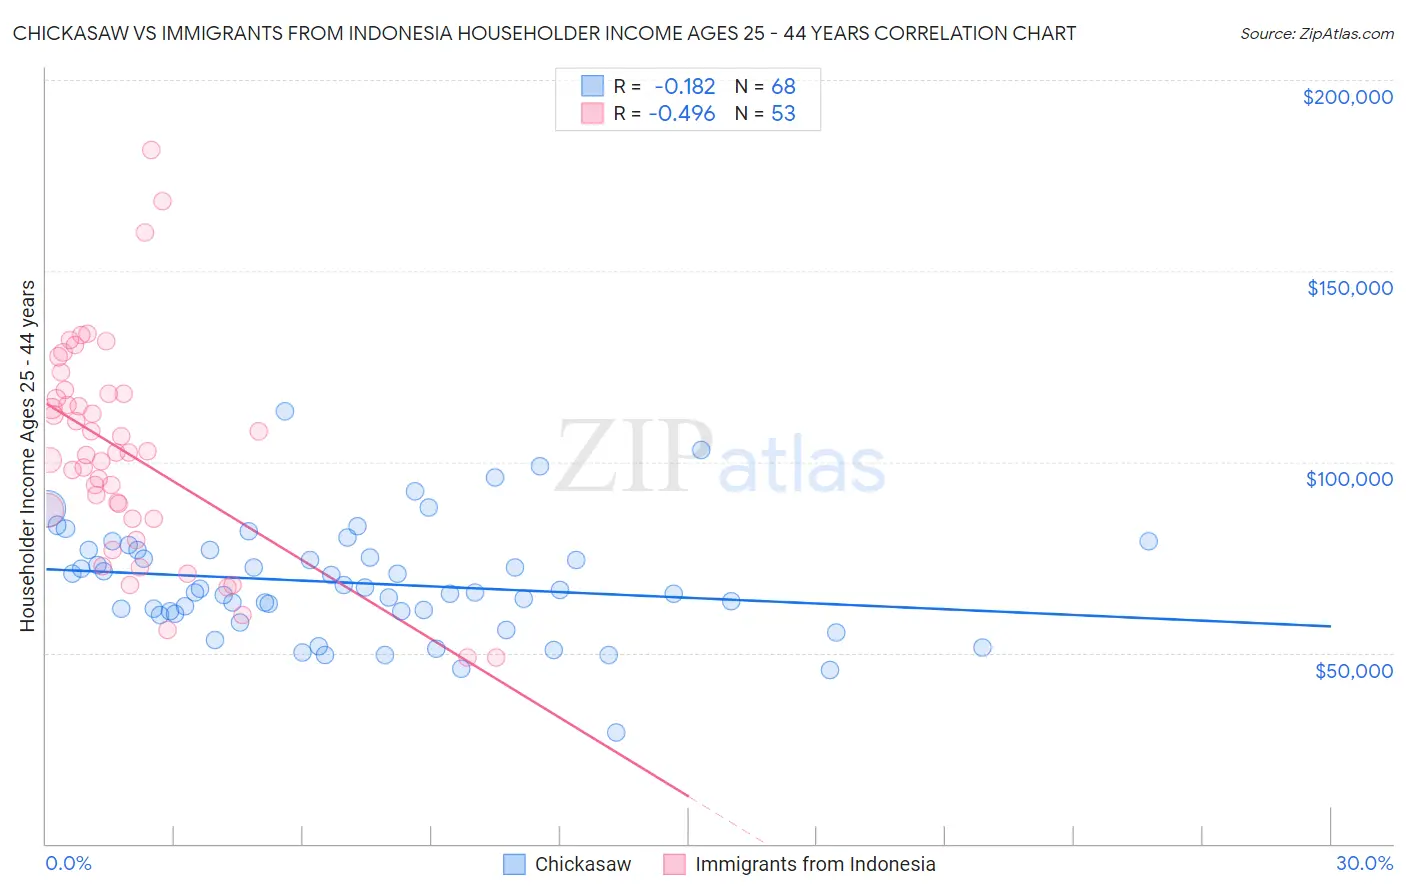 Chickasaw vs Immigrants from Indonesia Householder Income Ages 25 - 44 years